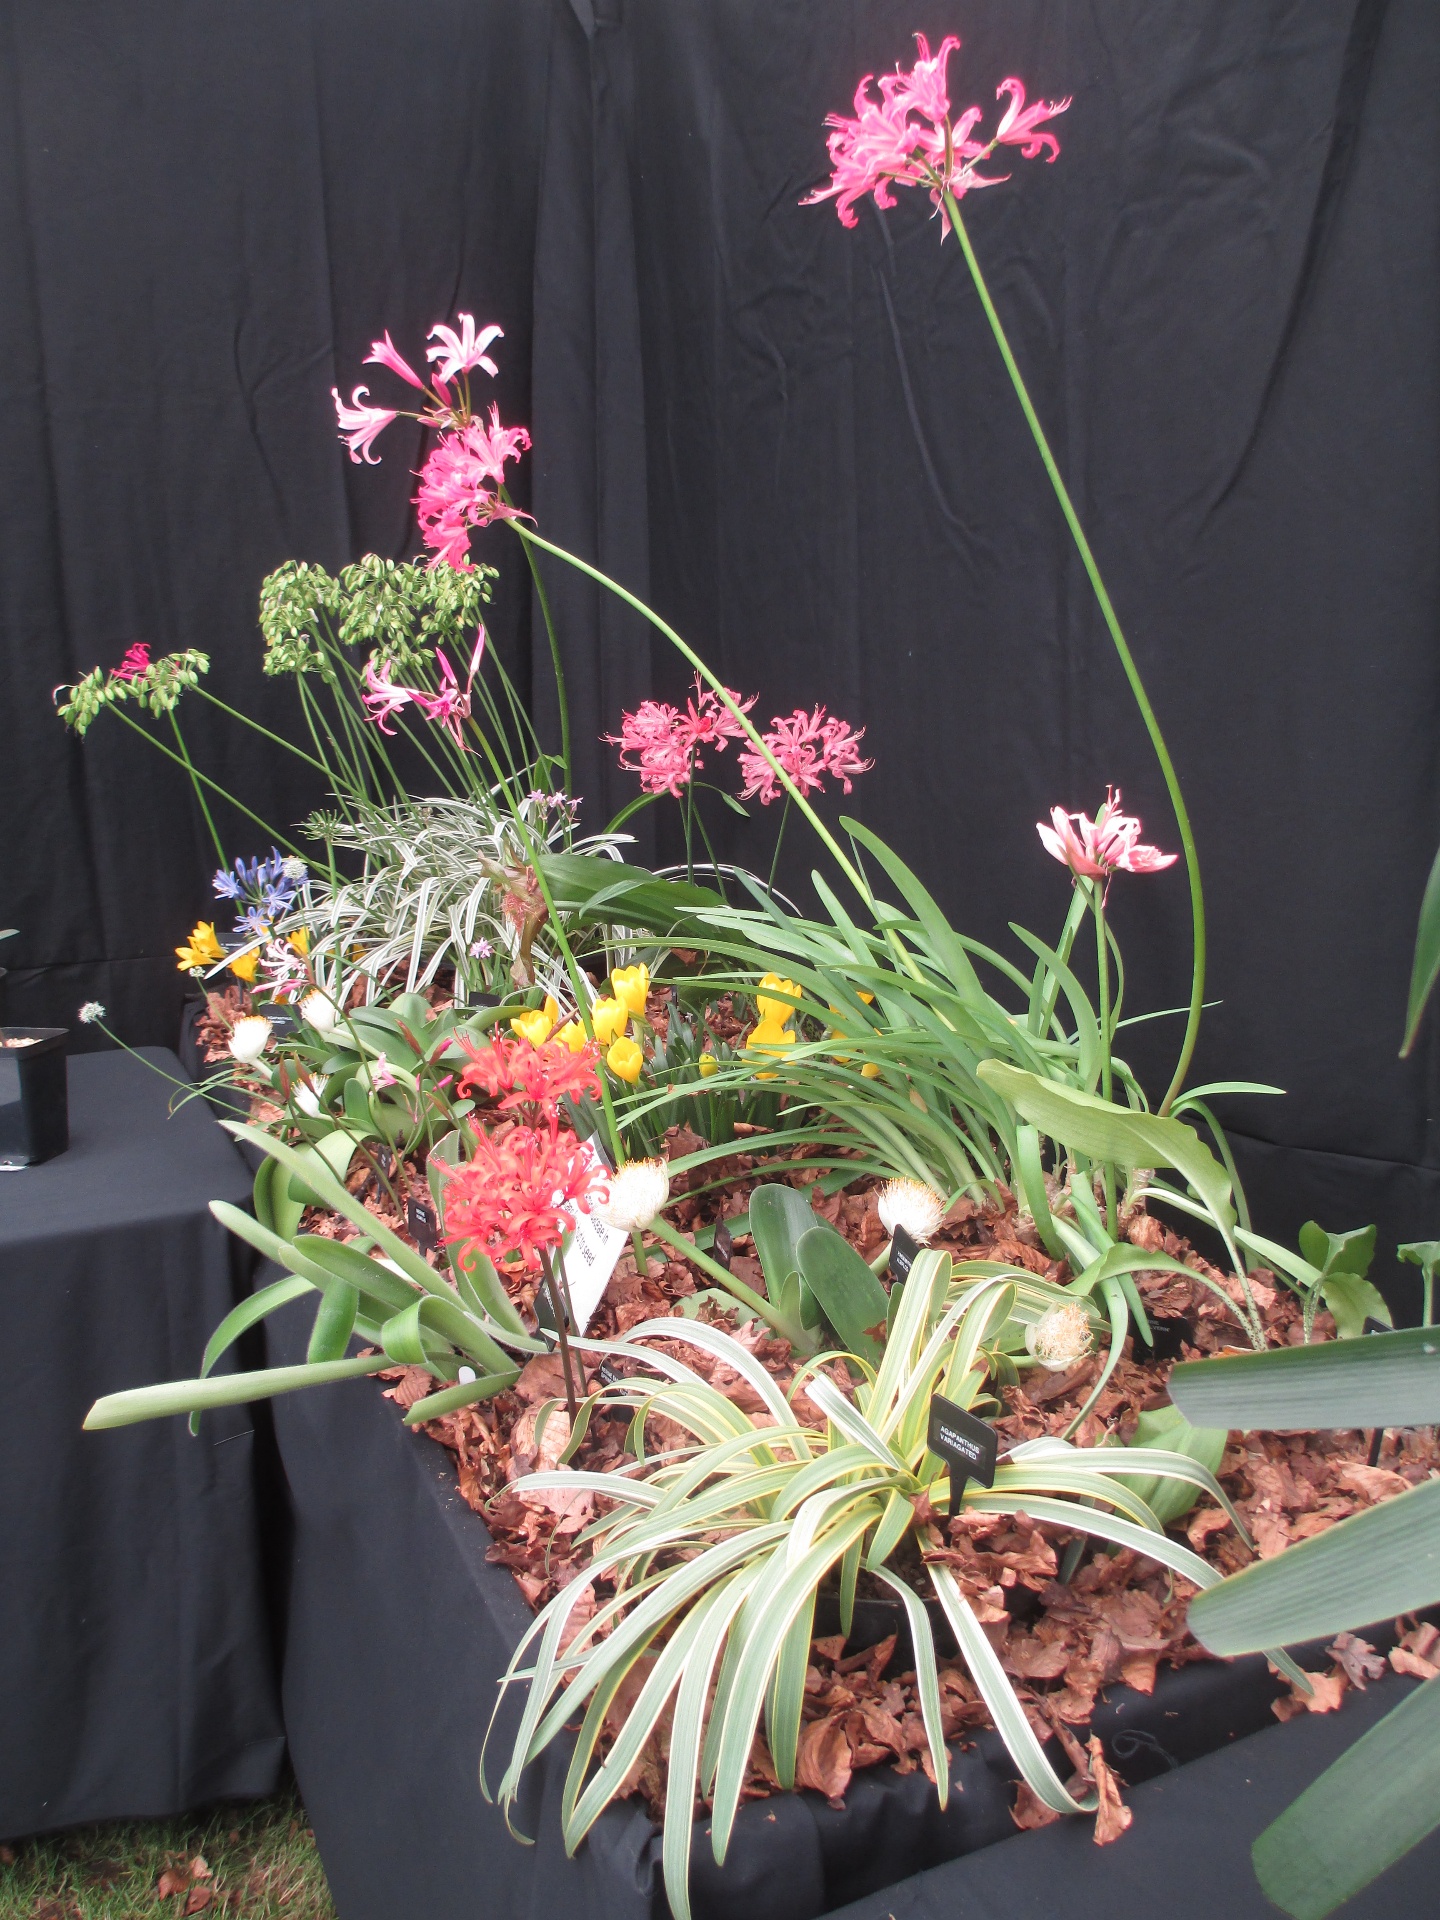 Display including other Amaryllids as well as Nerines.